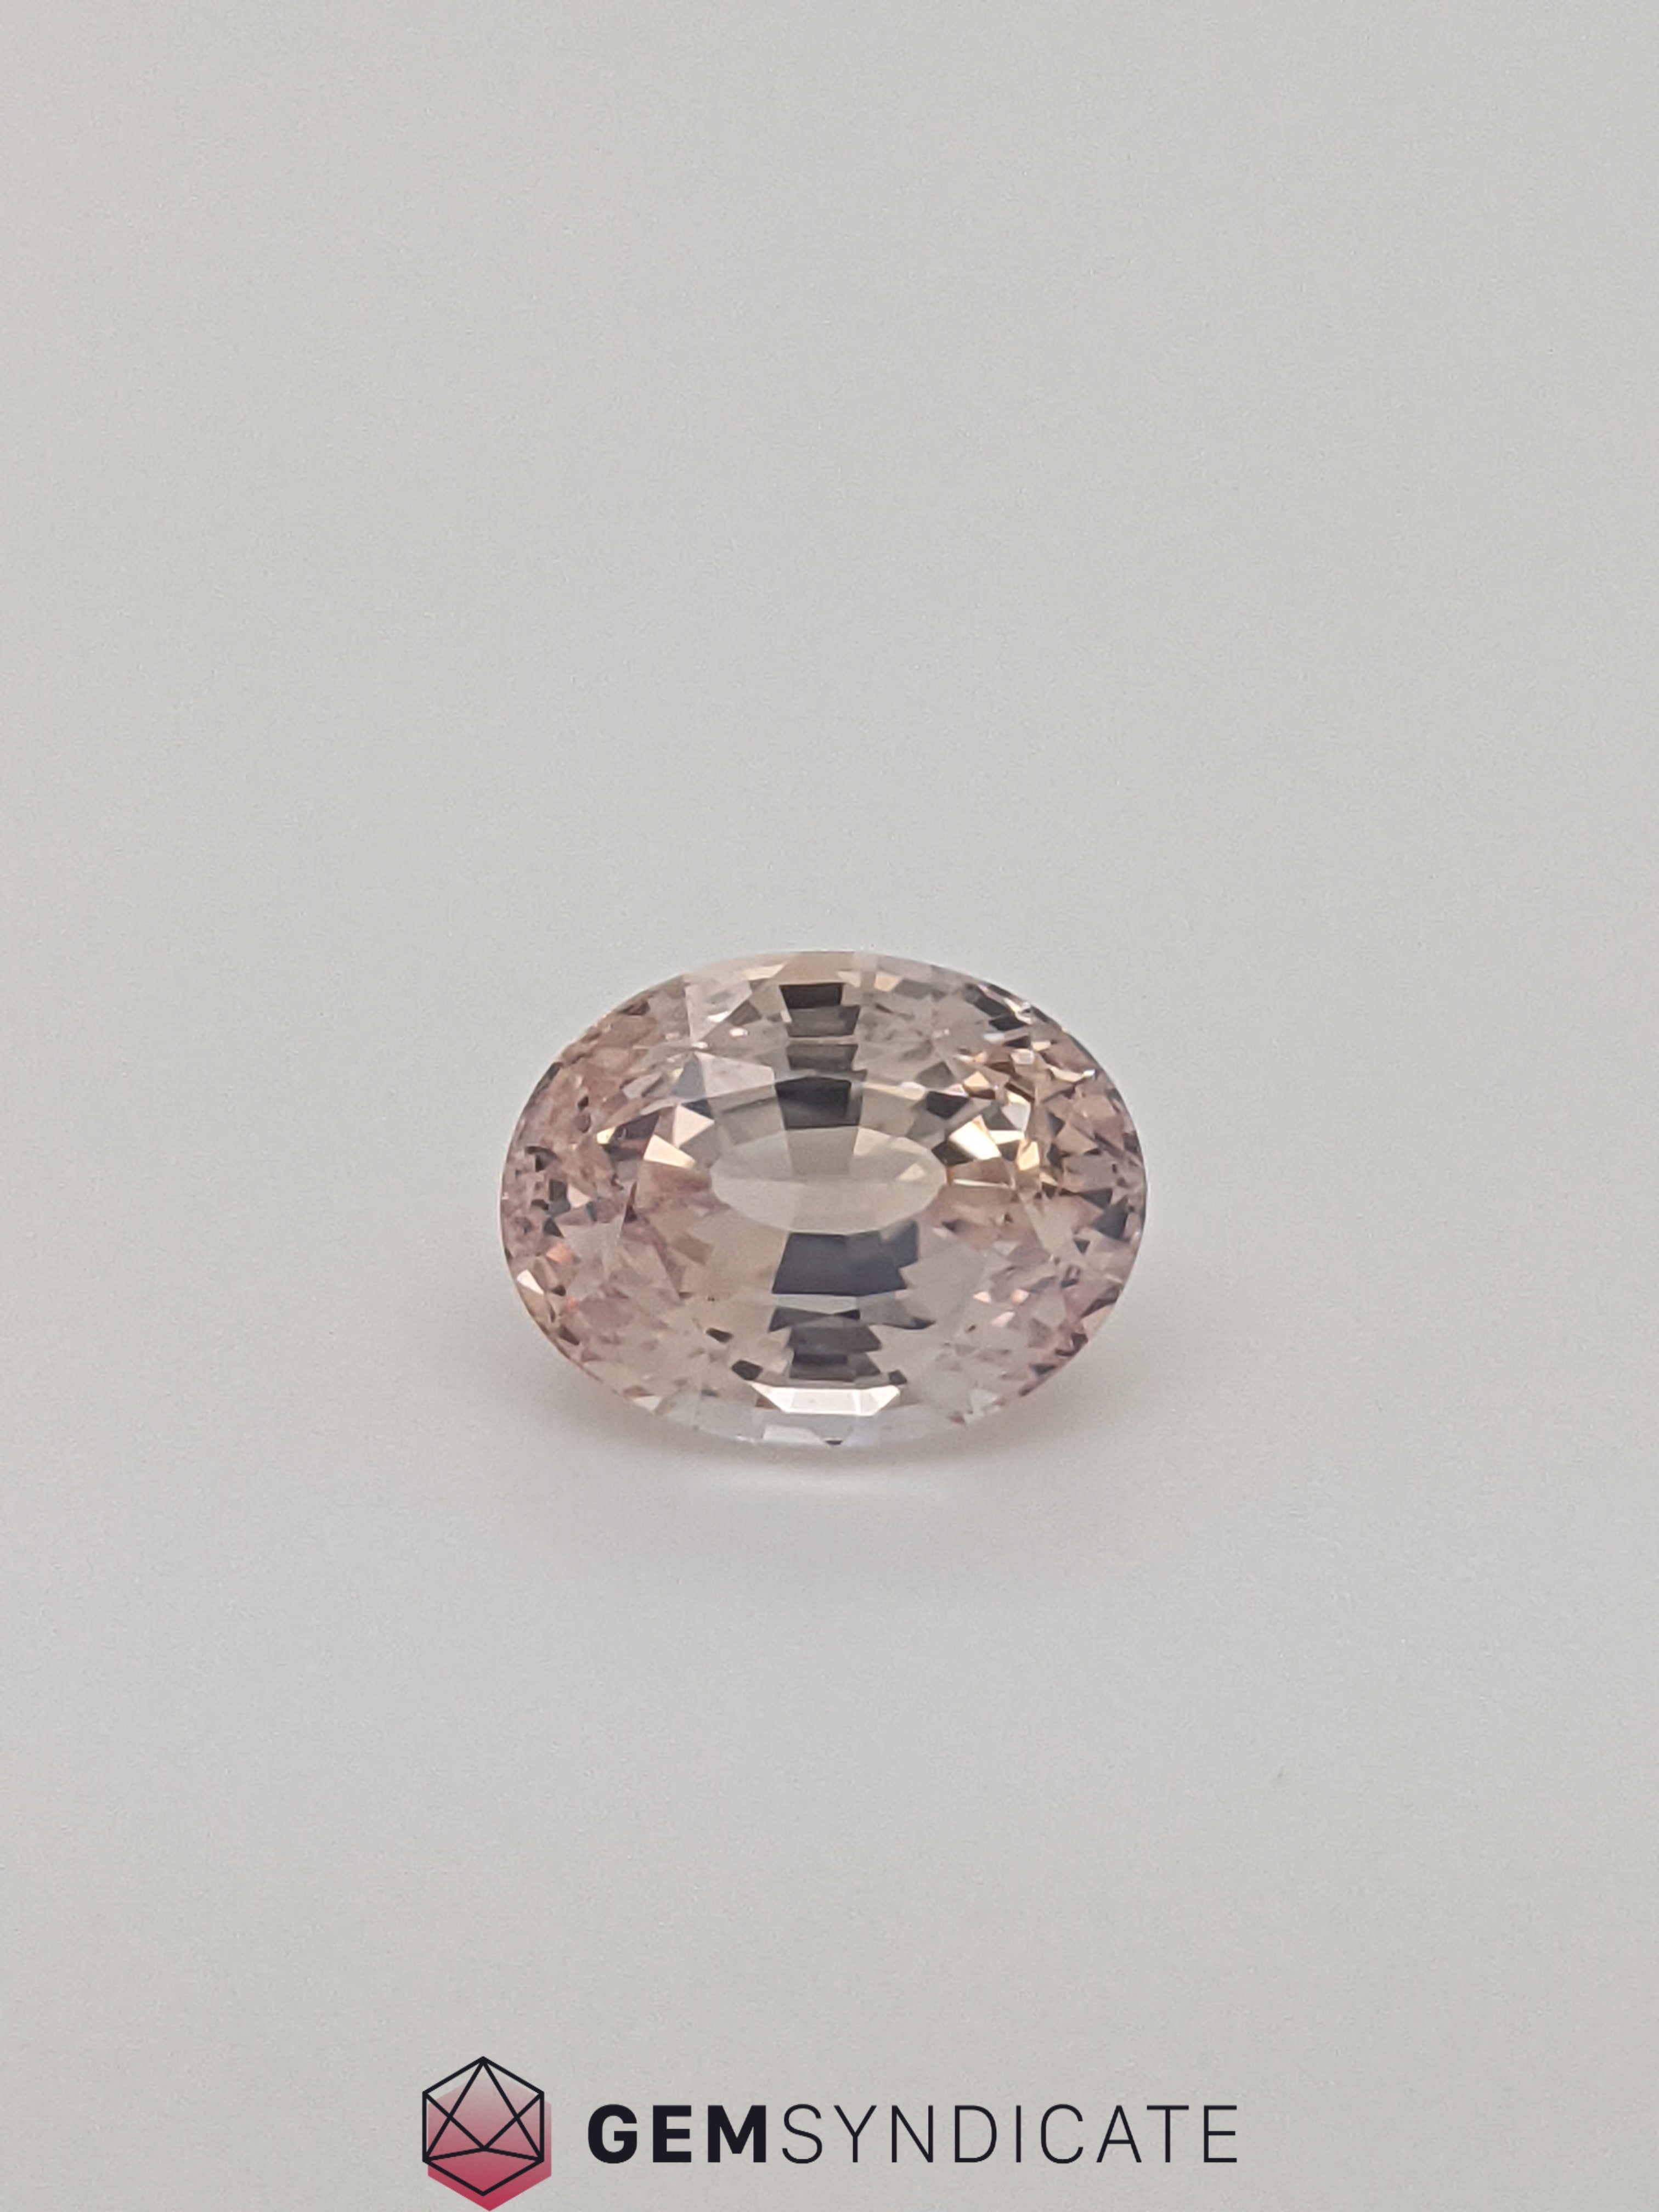 Magnificent Oval Peach Sapphire 3.21ct